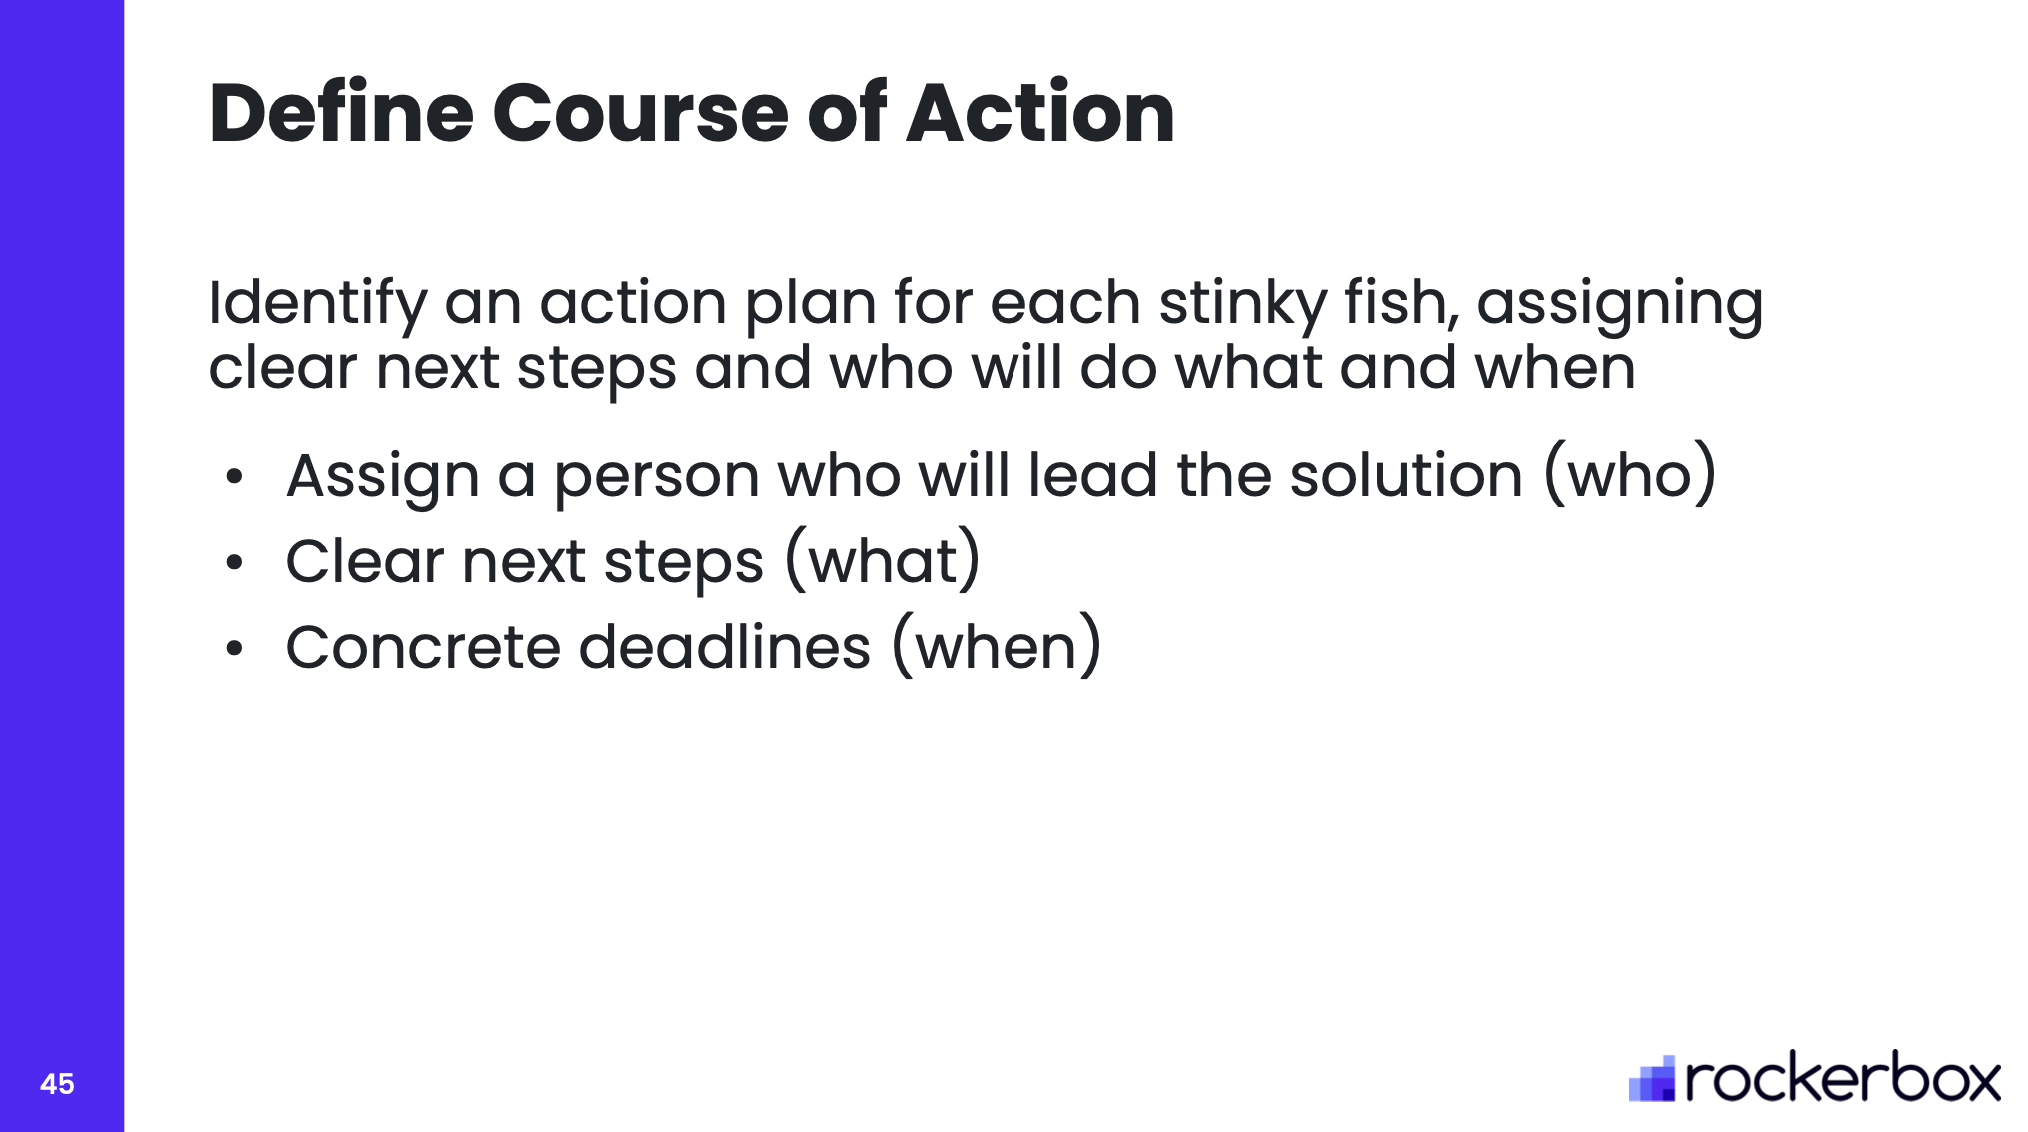 Define Course of Action: Identify an Action Plan